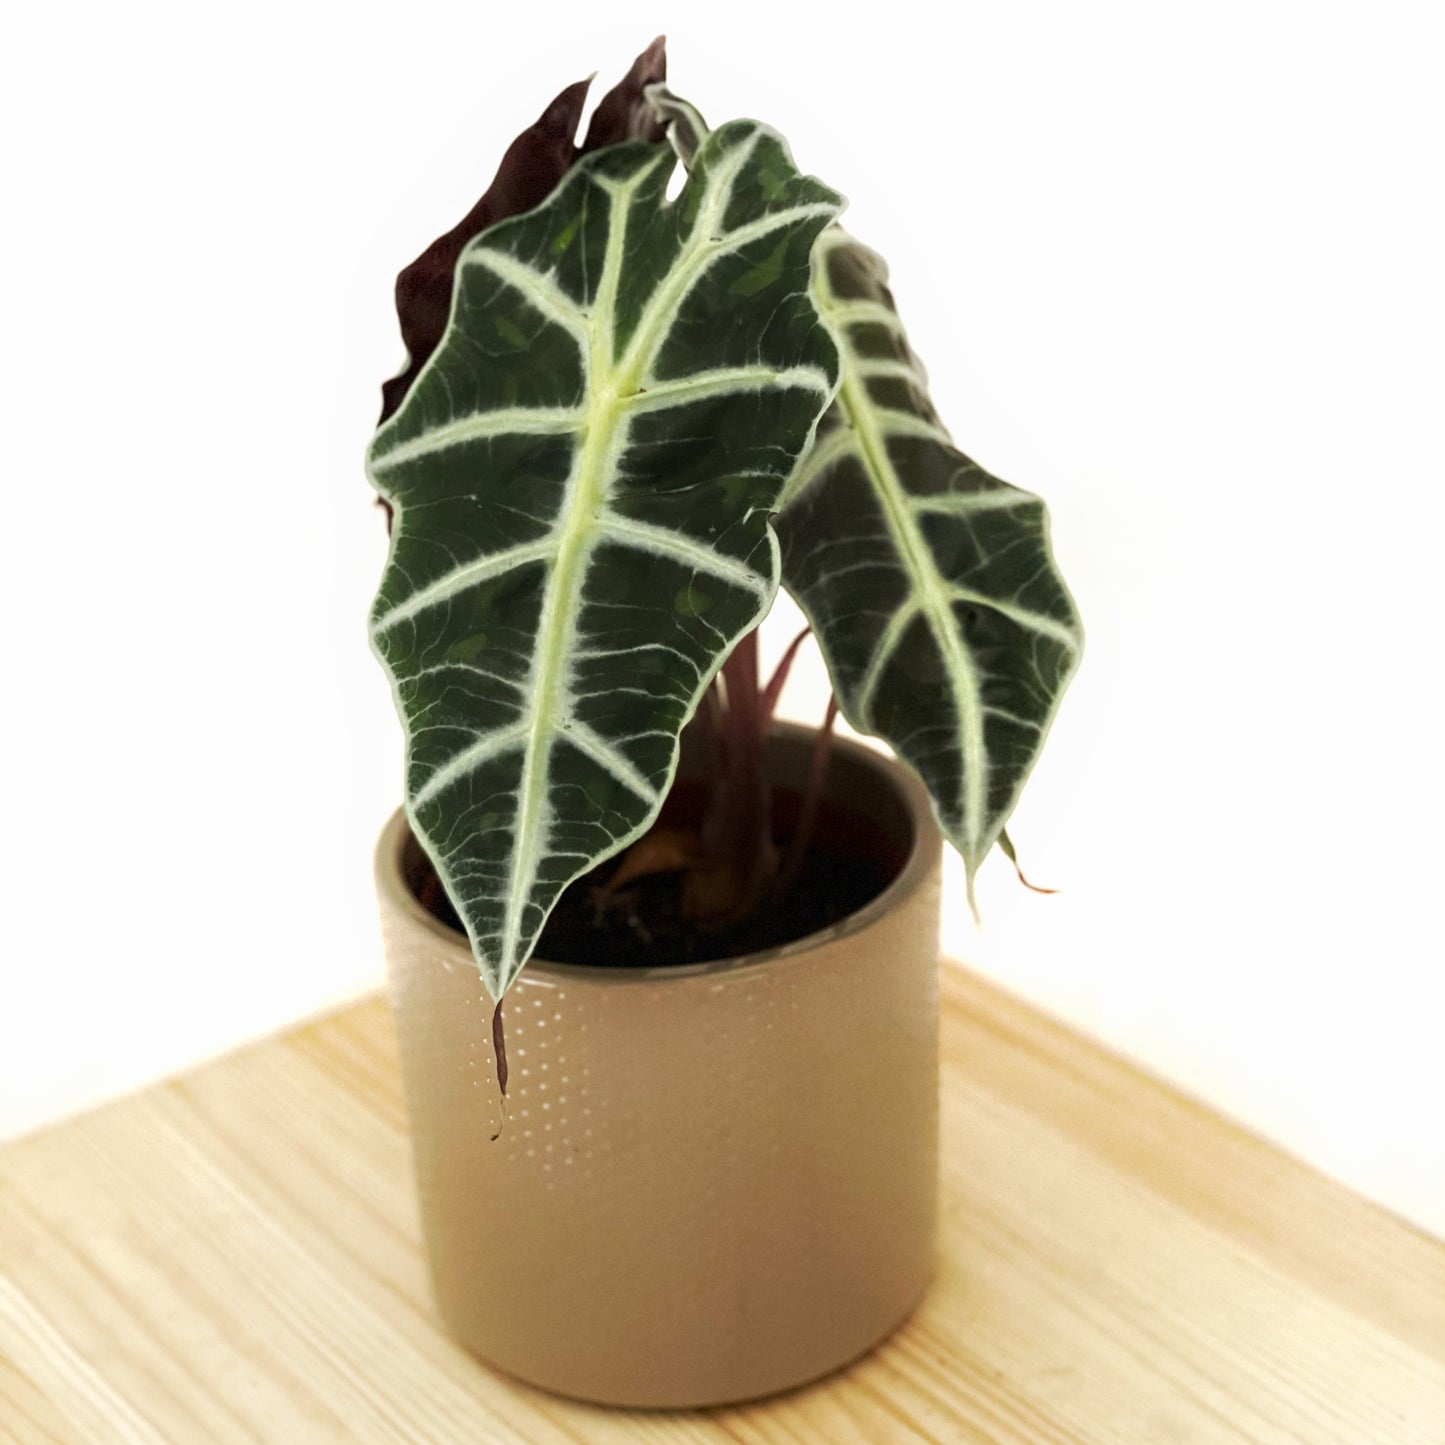 Alocasia polly - African Mask Plant